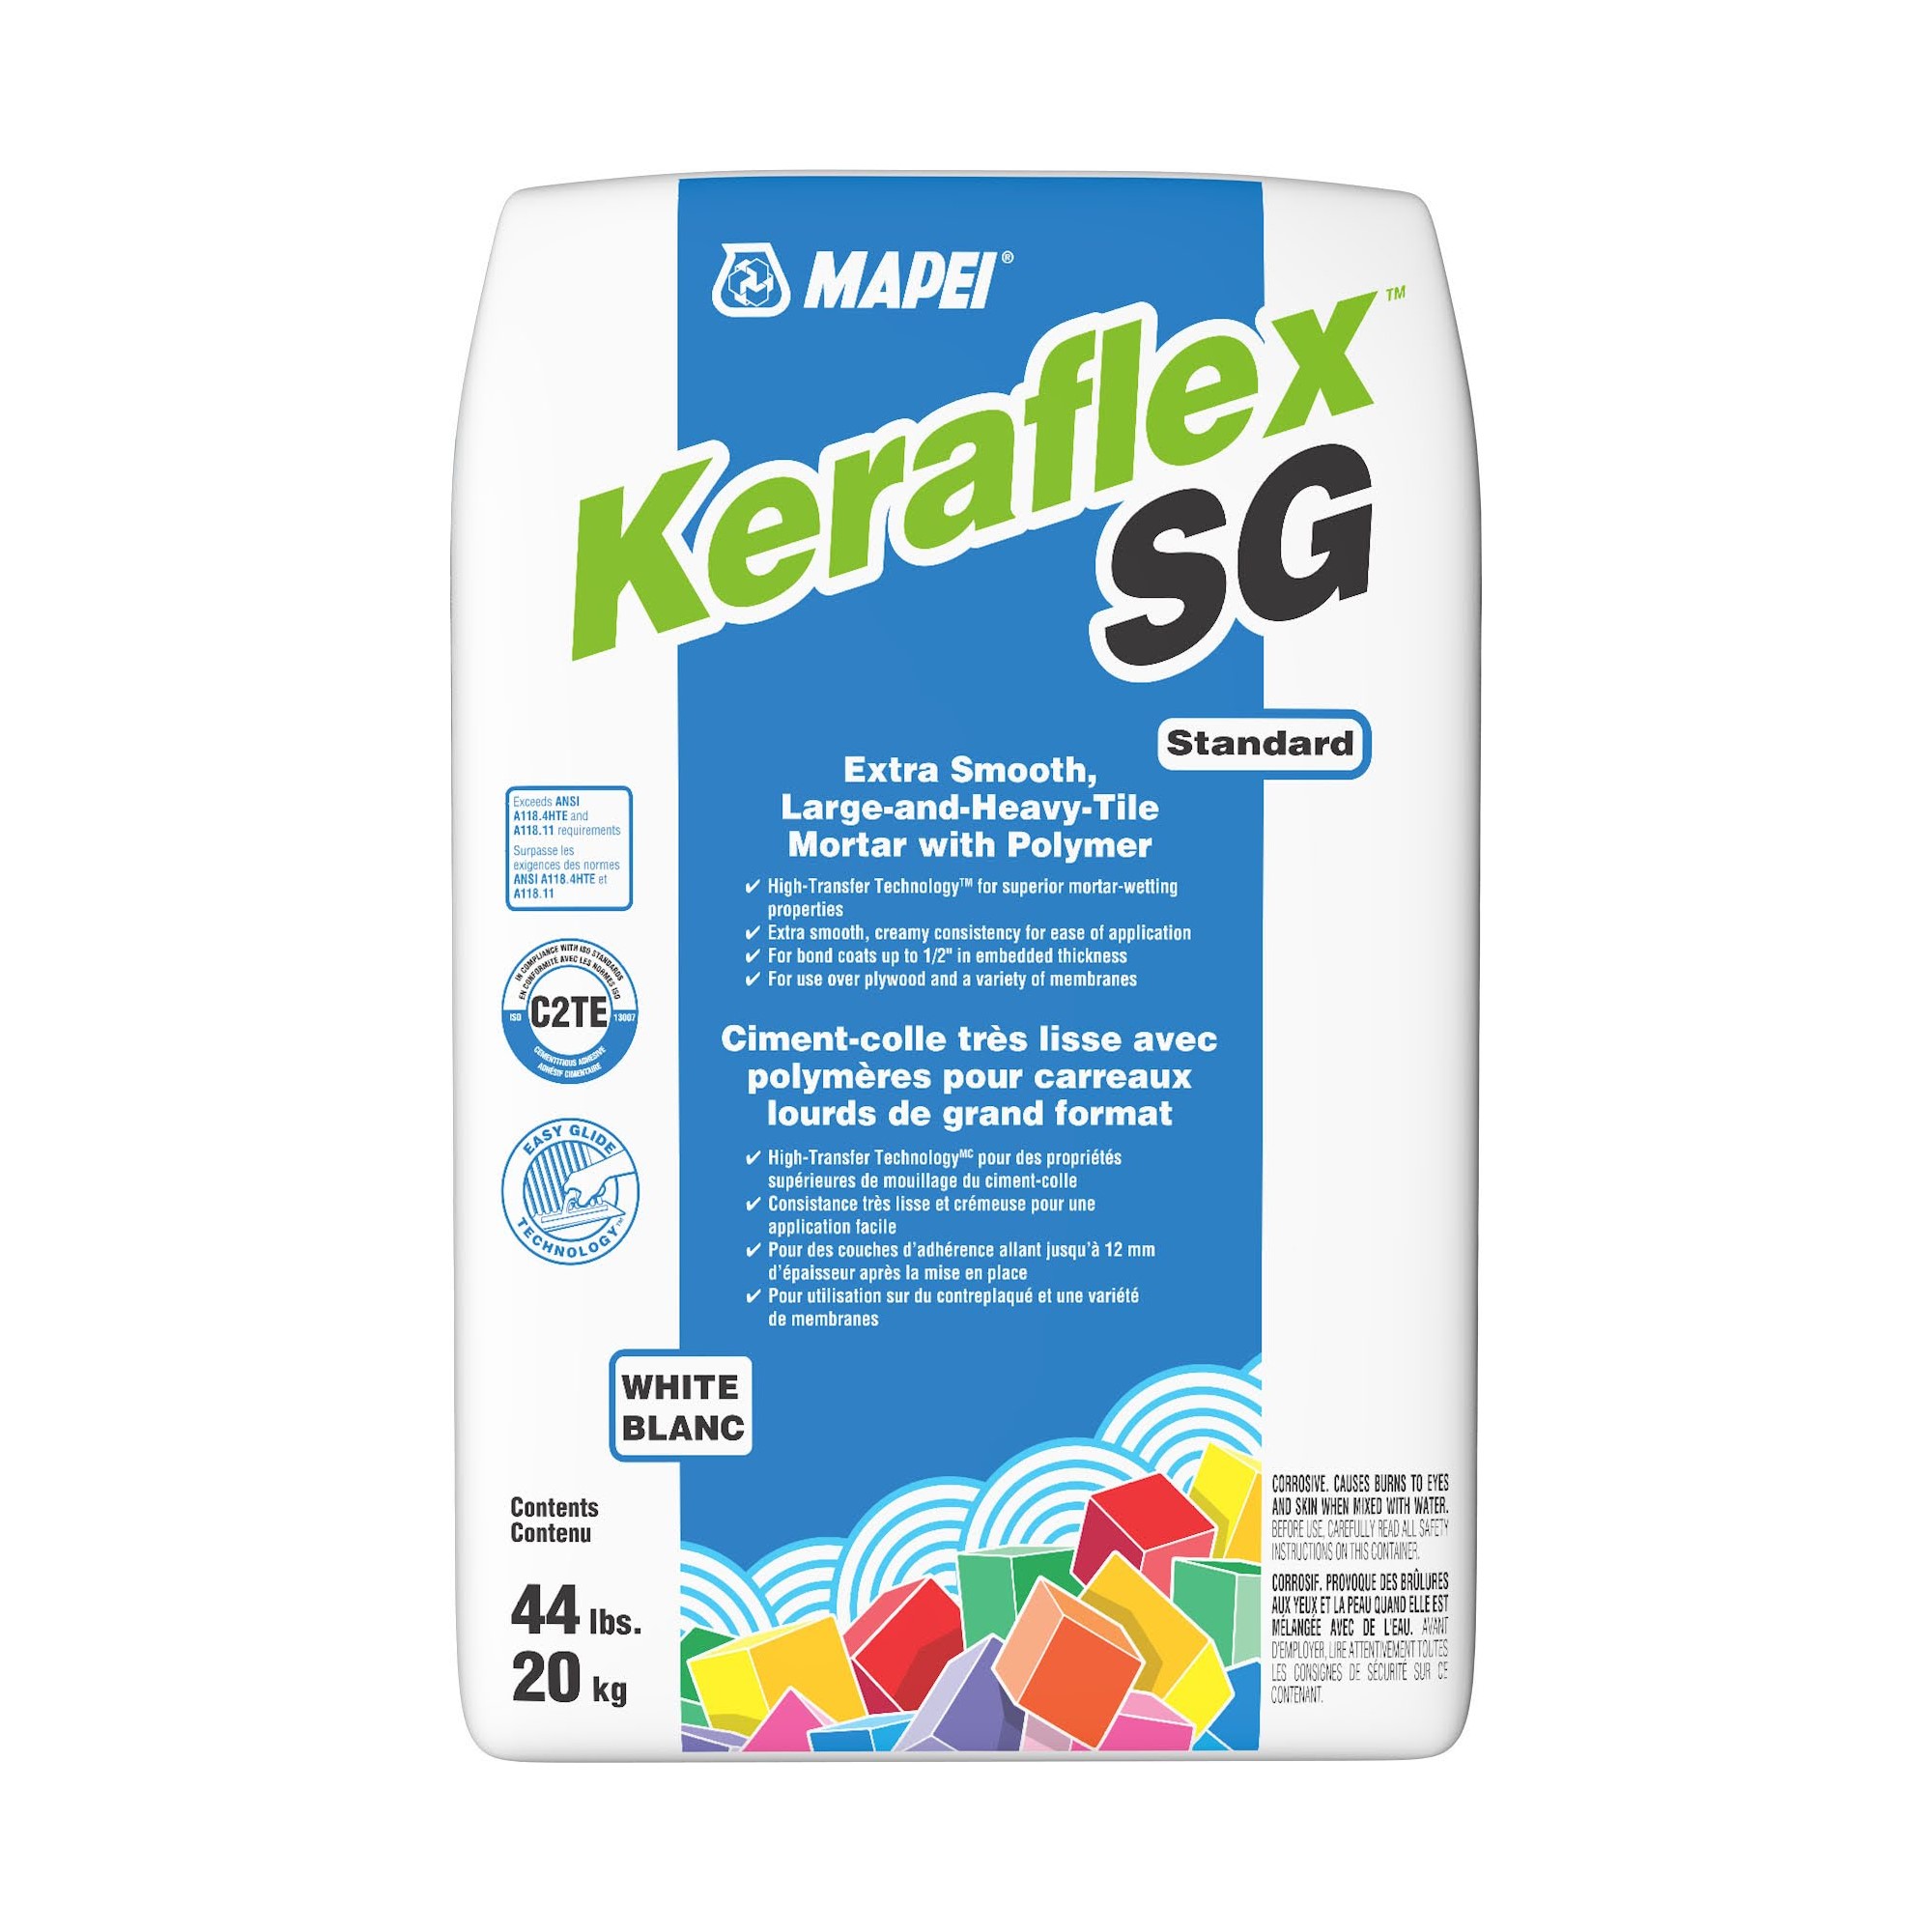 Mapei - Keraflex SG Standard "WHITE" / Extra Smooth Large & Heavy Tile Mortar with polymer - 44 lbs